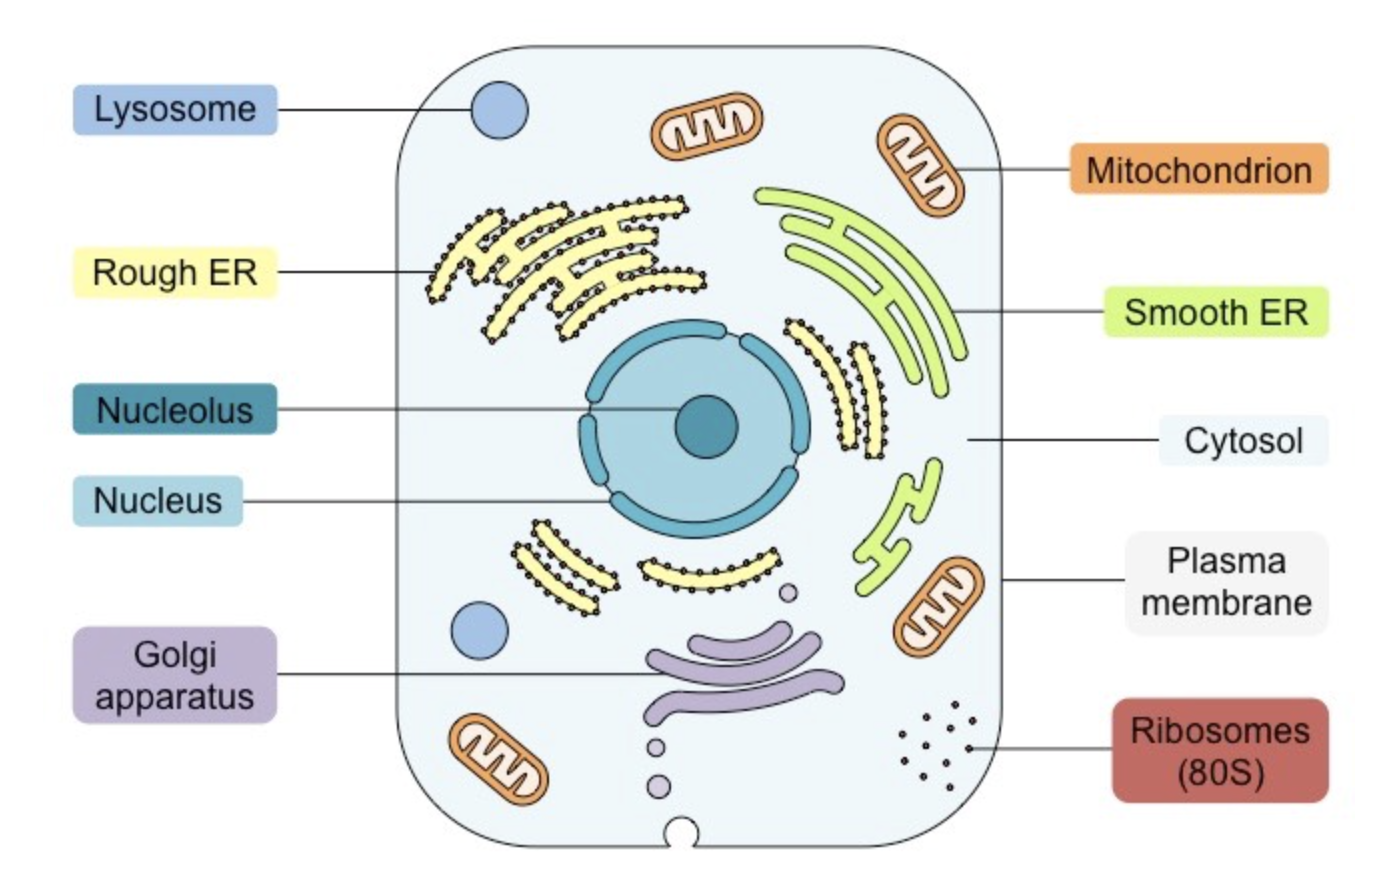 <p><strong><span>Key Features:</span></strong></p><ul><li><p><em><span>Nucleus</span></em><span> – shown as double membrane structure with pores</span></p></li><li><p><em><span>Mitochondria</span></em><span> – double membrane with inner one folded into cristae ; no larger than half the nucleus in size</span></p></li><li><p><em><span>Golgi apparatus</span></em><span> – shown as a series of enclosed sacs (cisternae) with vesicles leading to and from</span></p></li><li><p><em><span>Endoplasmic reticulum</span></em><span> – interconnected membranes shown as bare (smooth ER) and studded (rough ER)</span></p></li><li><p><em><span>Ribosomes</span></em><span> – labelled as 80S</span></p></li><li><p><em><span>Cytosol</span></em><span> – internal fluid labelled as </span><u><span>cytosol</span></u><span> (</span><em><span>‘cytoplasm'</span></em><span> is all internal contents minus the nucleus)</span></p></li></ul>